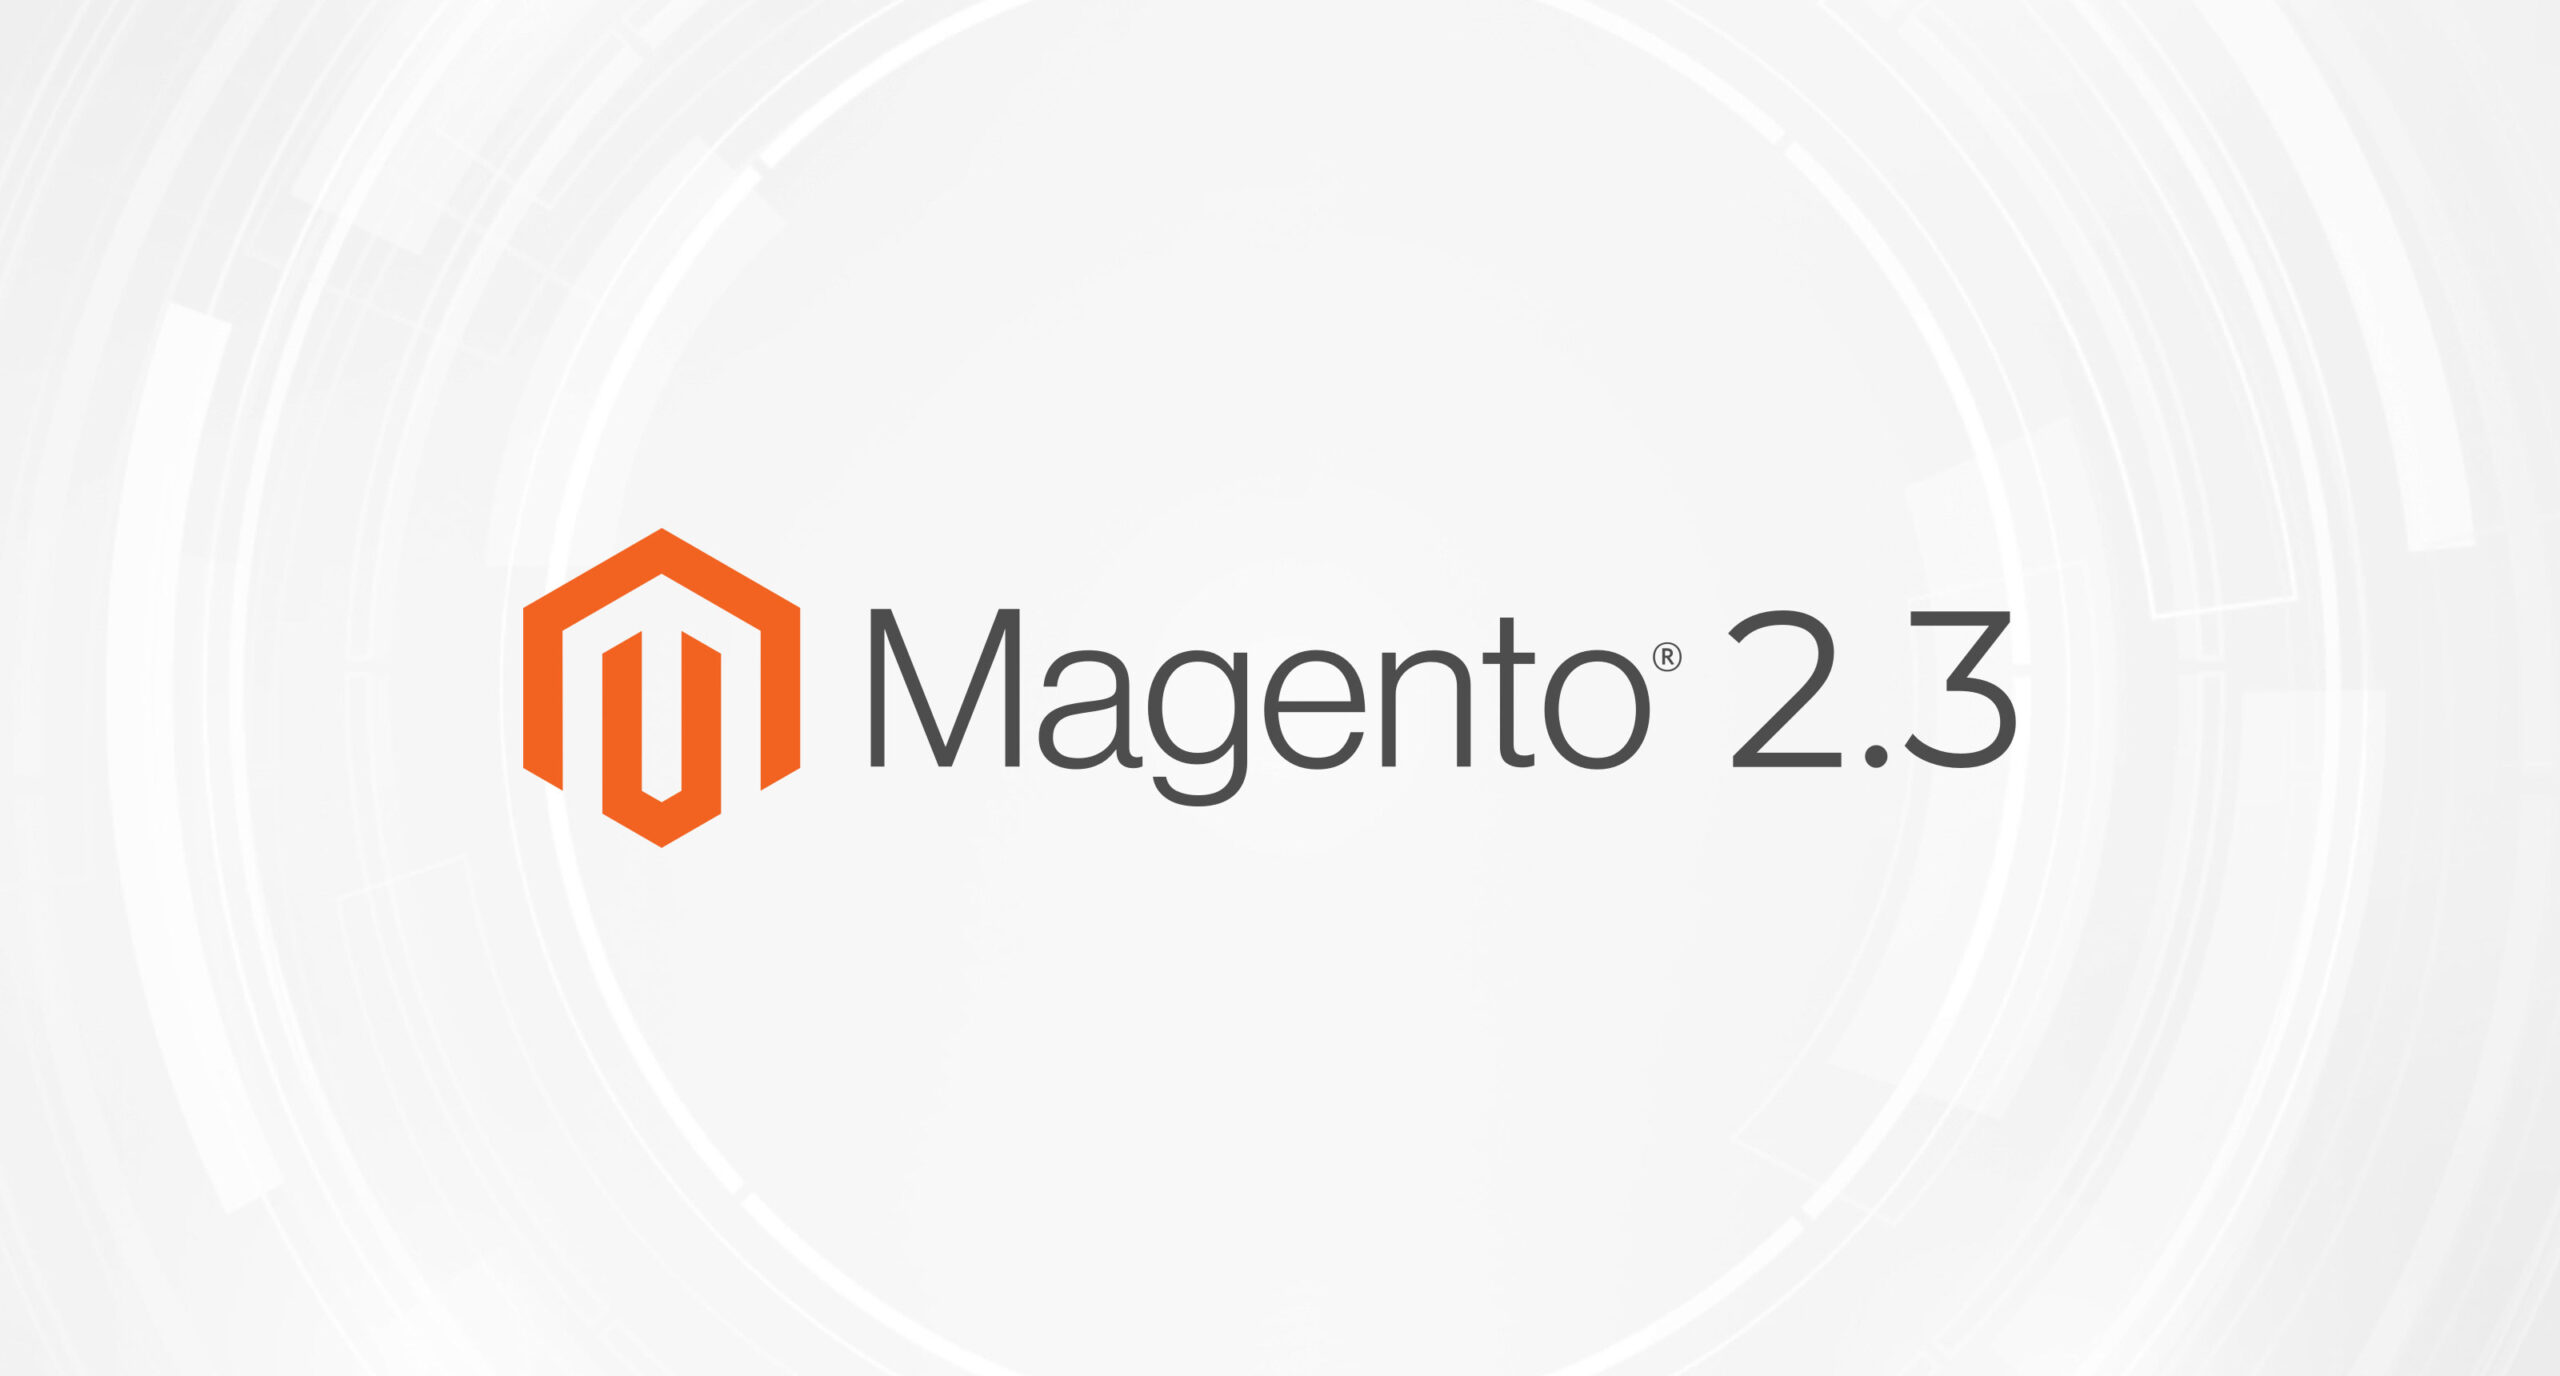 Magento 2.3 – What’s new under the hood?